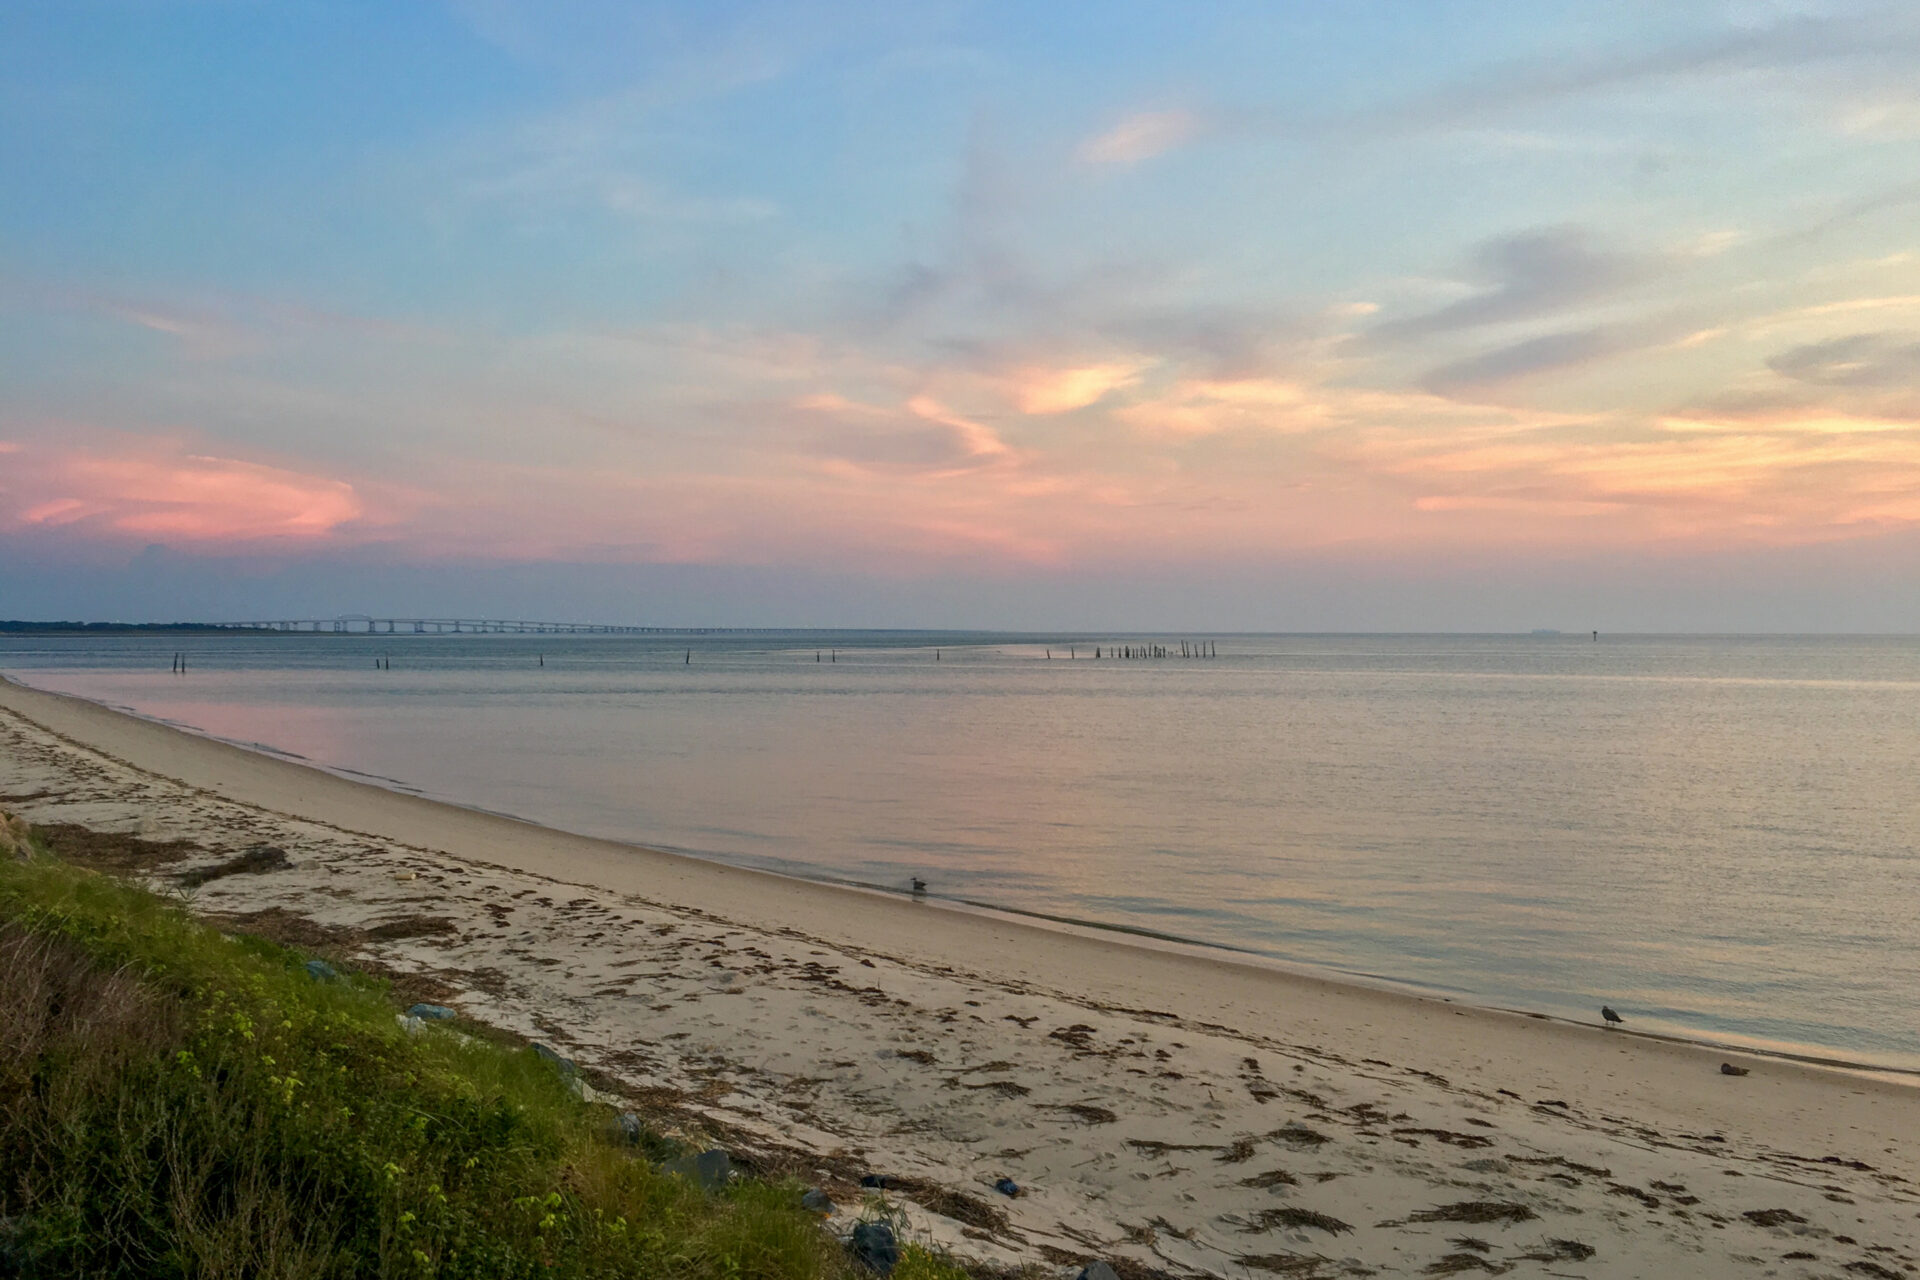 5 State Parks for Camping on the Chesapeake Bay